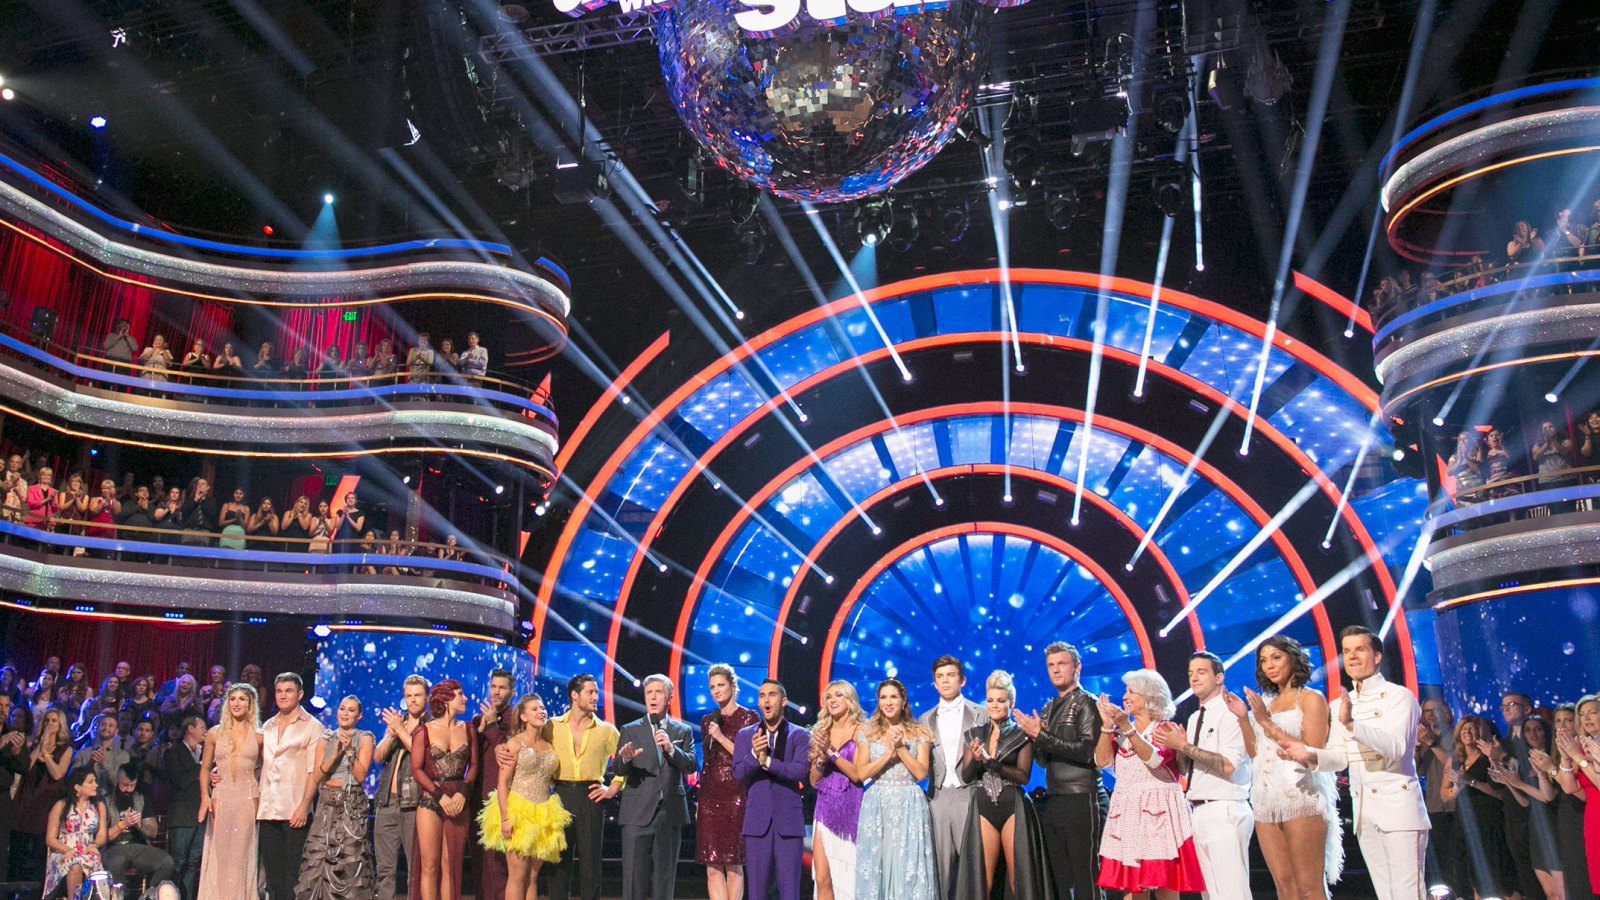 DWTS Theme Includes Dances From Magic Mike, Britney Spears Details